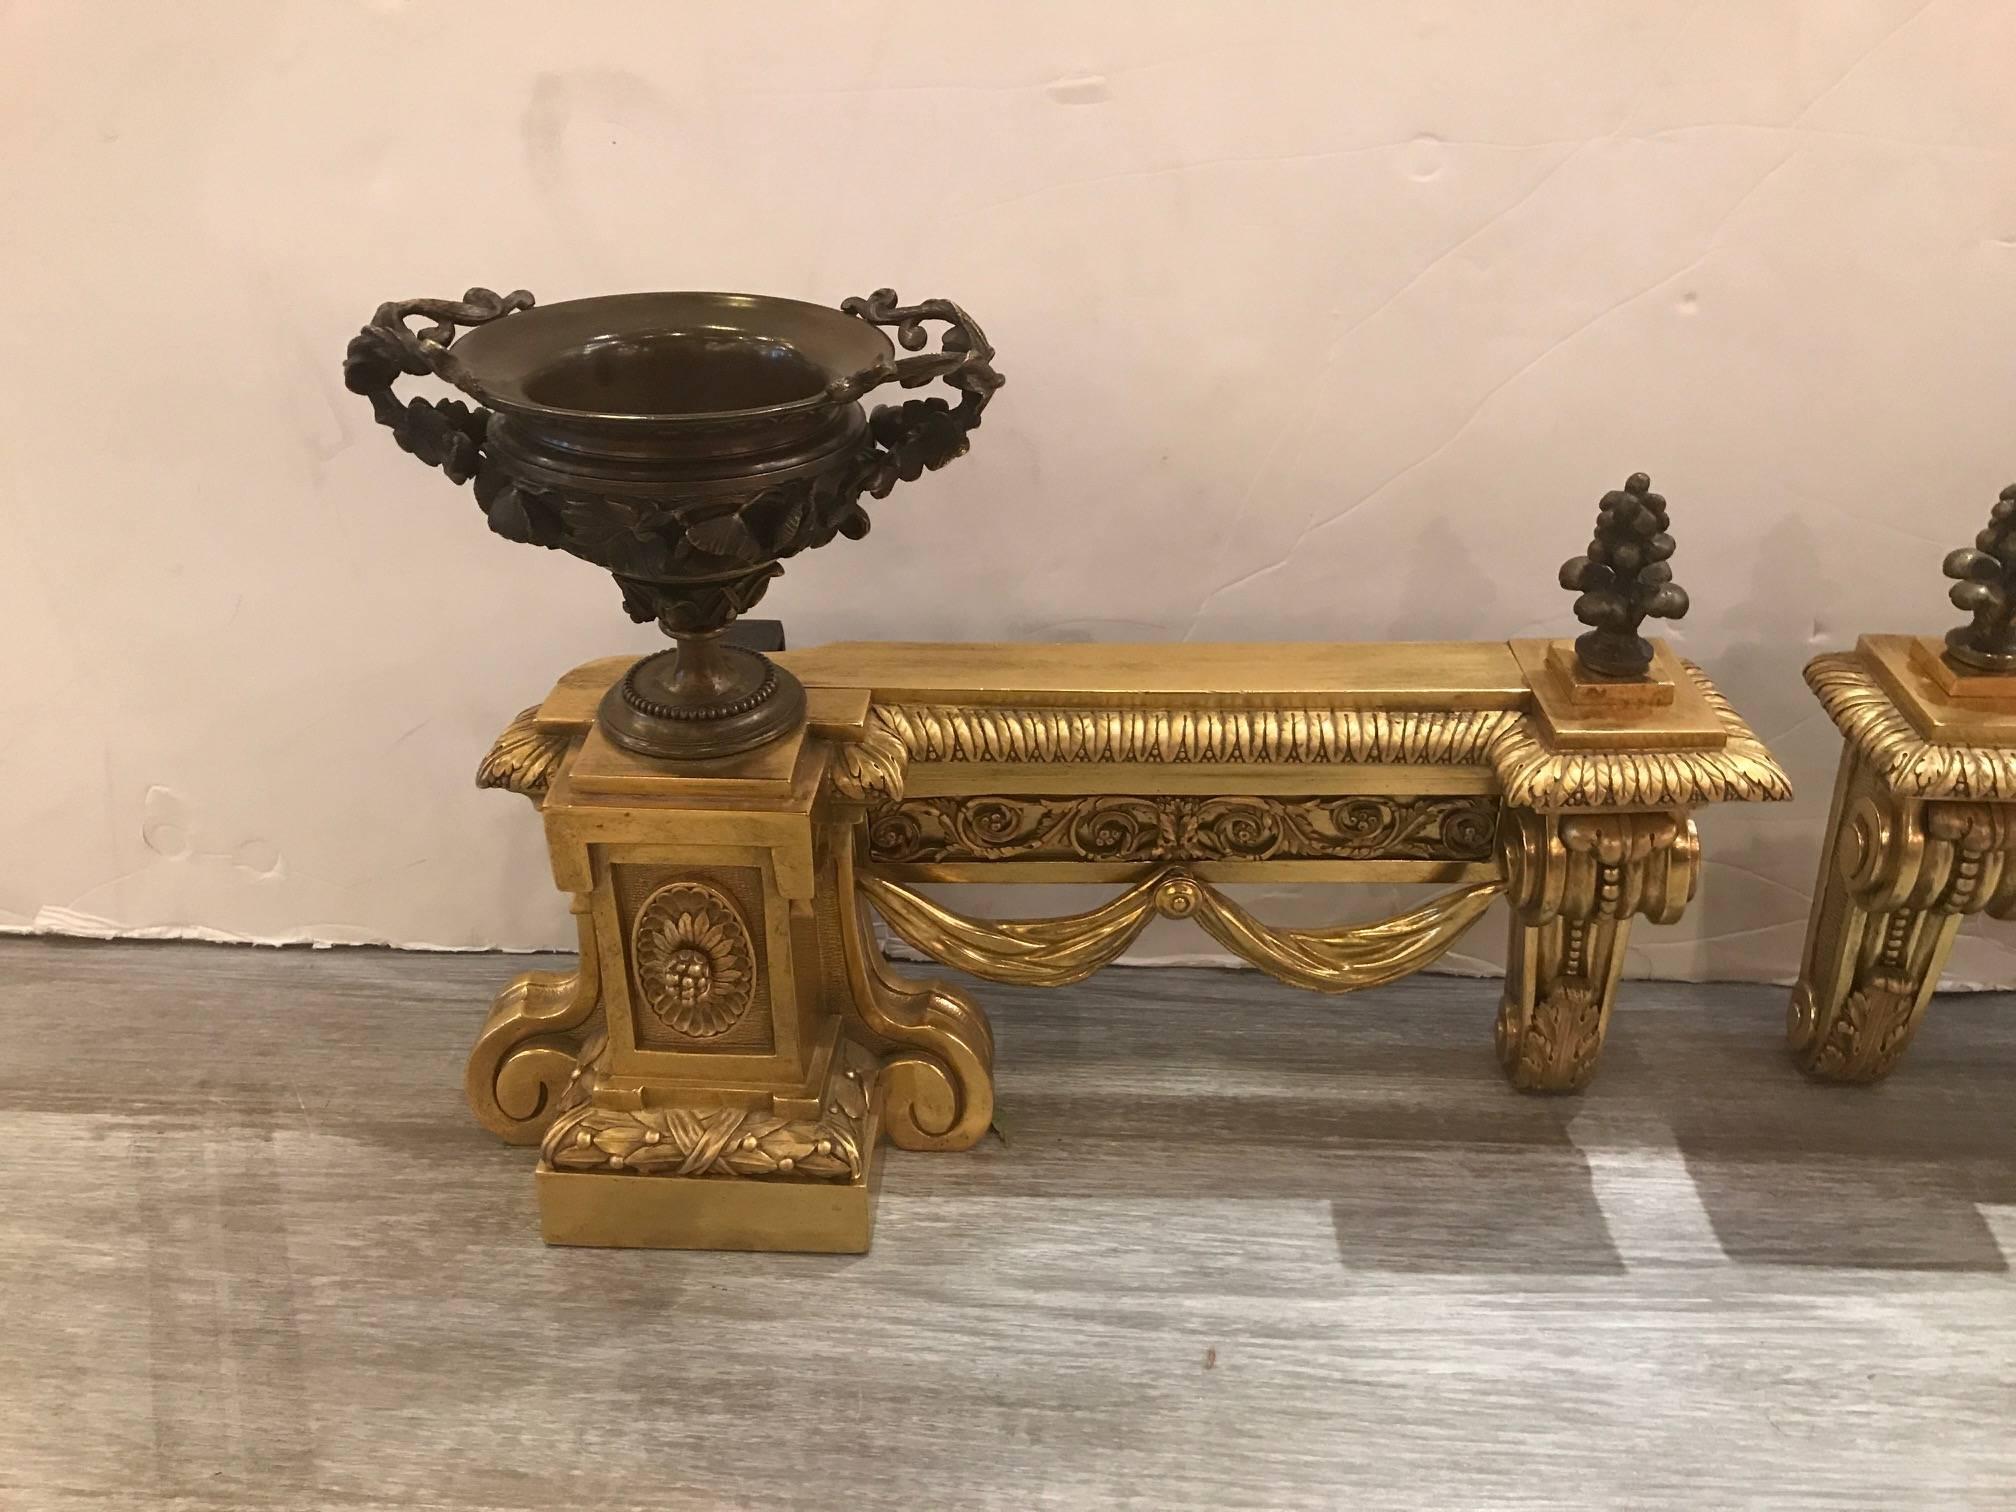 A beautify cast pair of bronze Louis XV style andiron chenets. The patinated bronze urn form with crisply cast and highly detailed bronze doré bases, late 19th century, France.